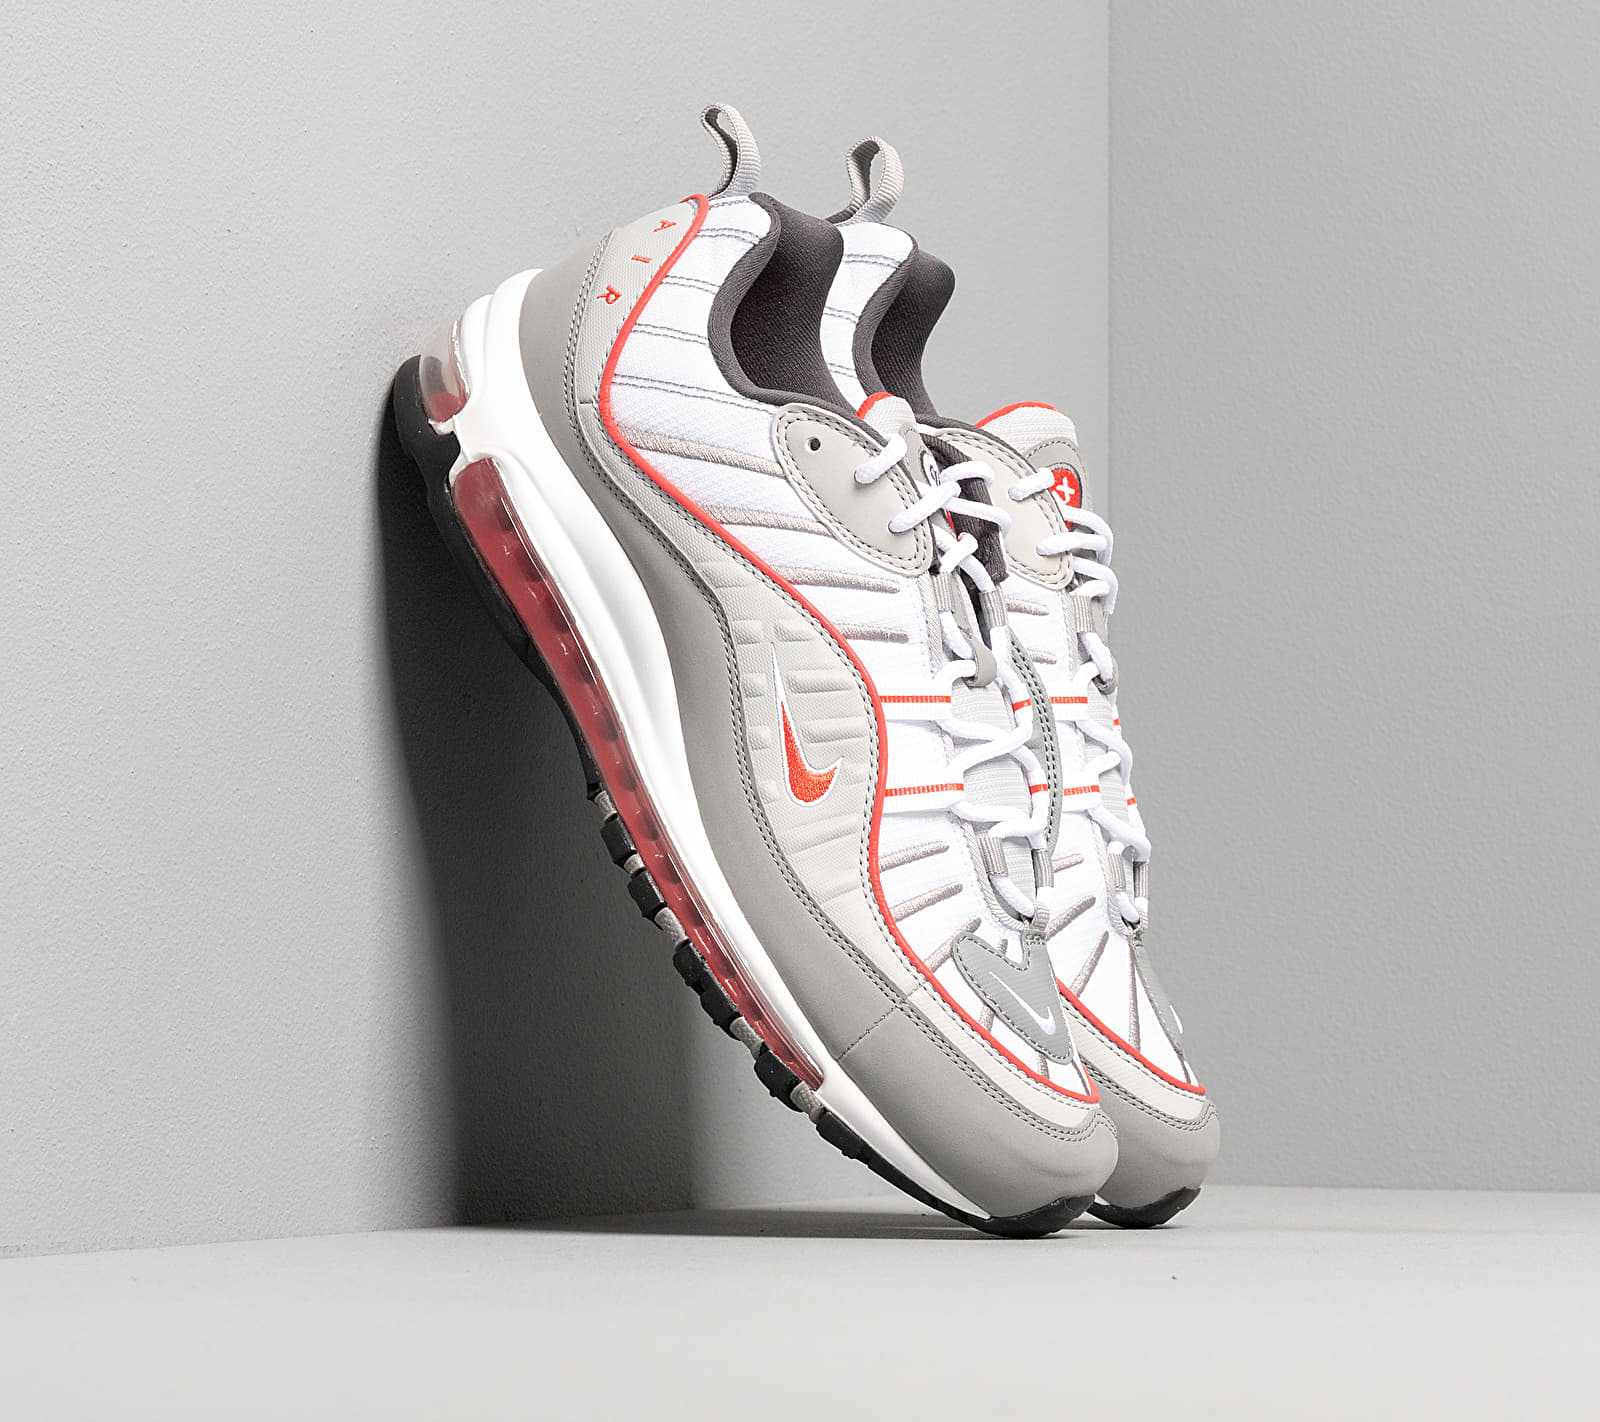 Nike Air Max 98 Particle Grey/ Track Red-Iron Grey CI3693-001